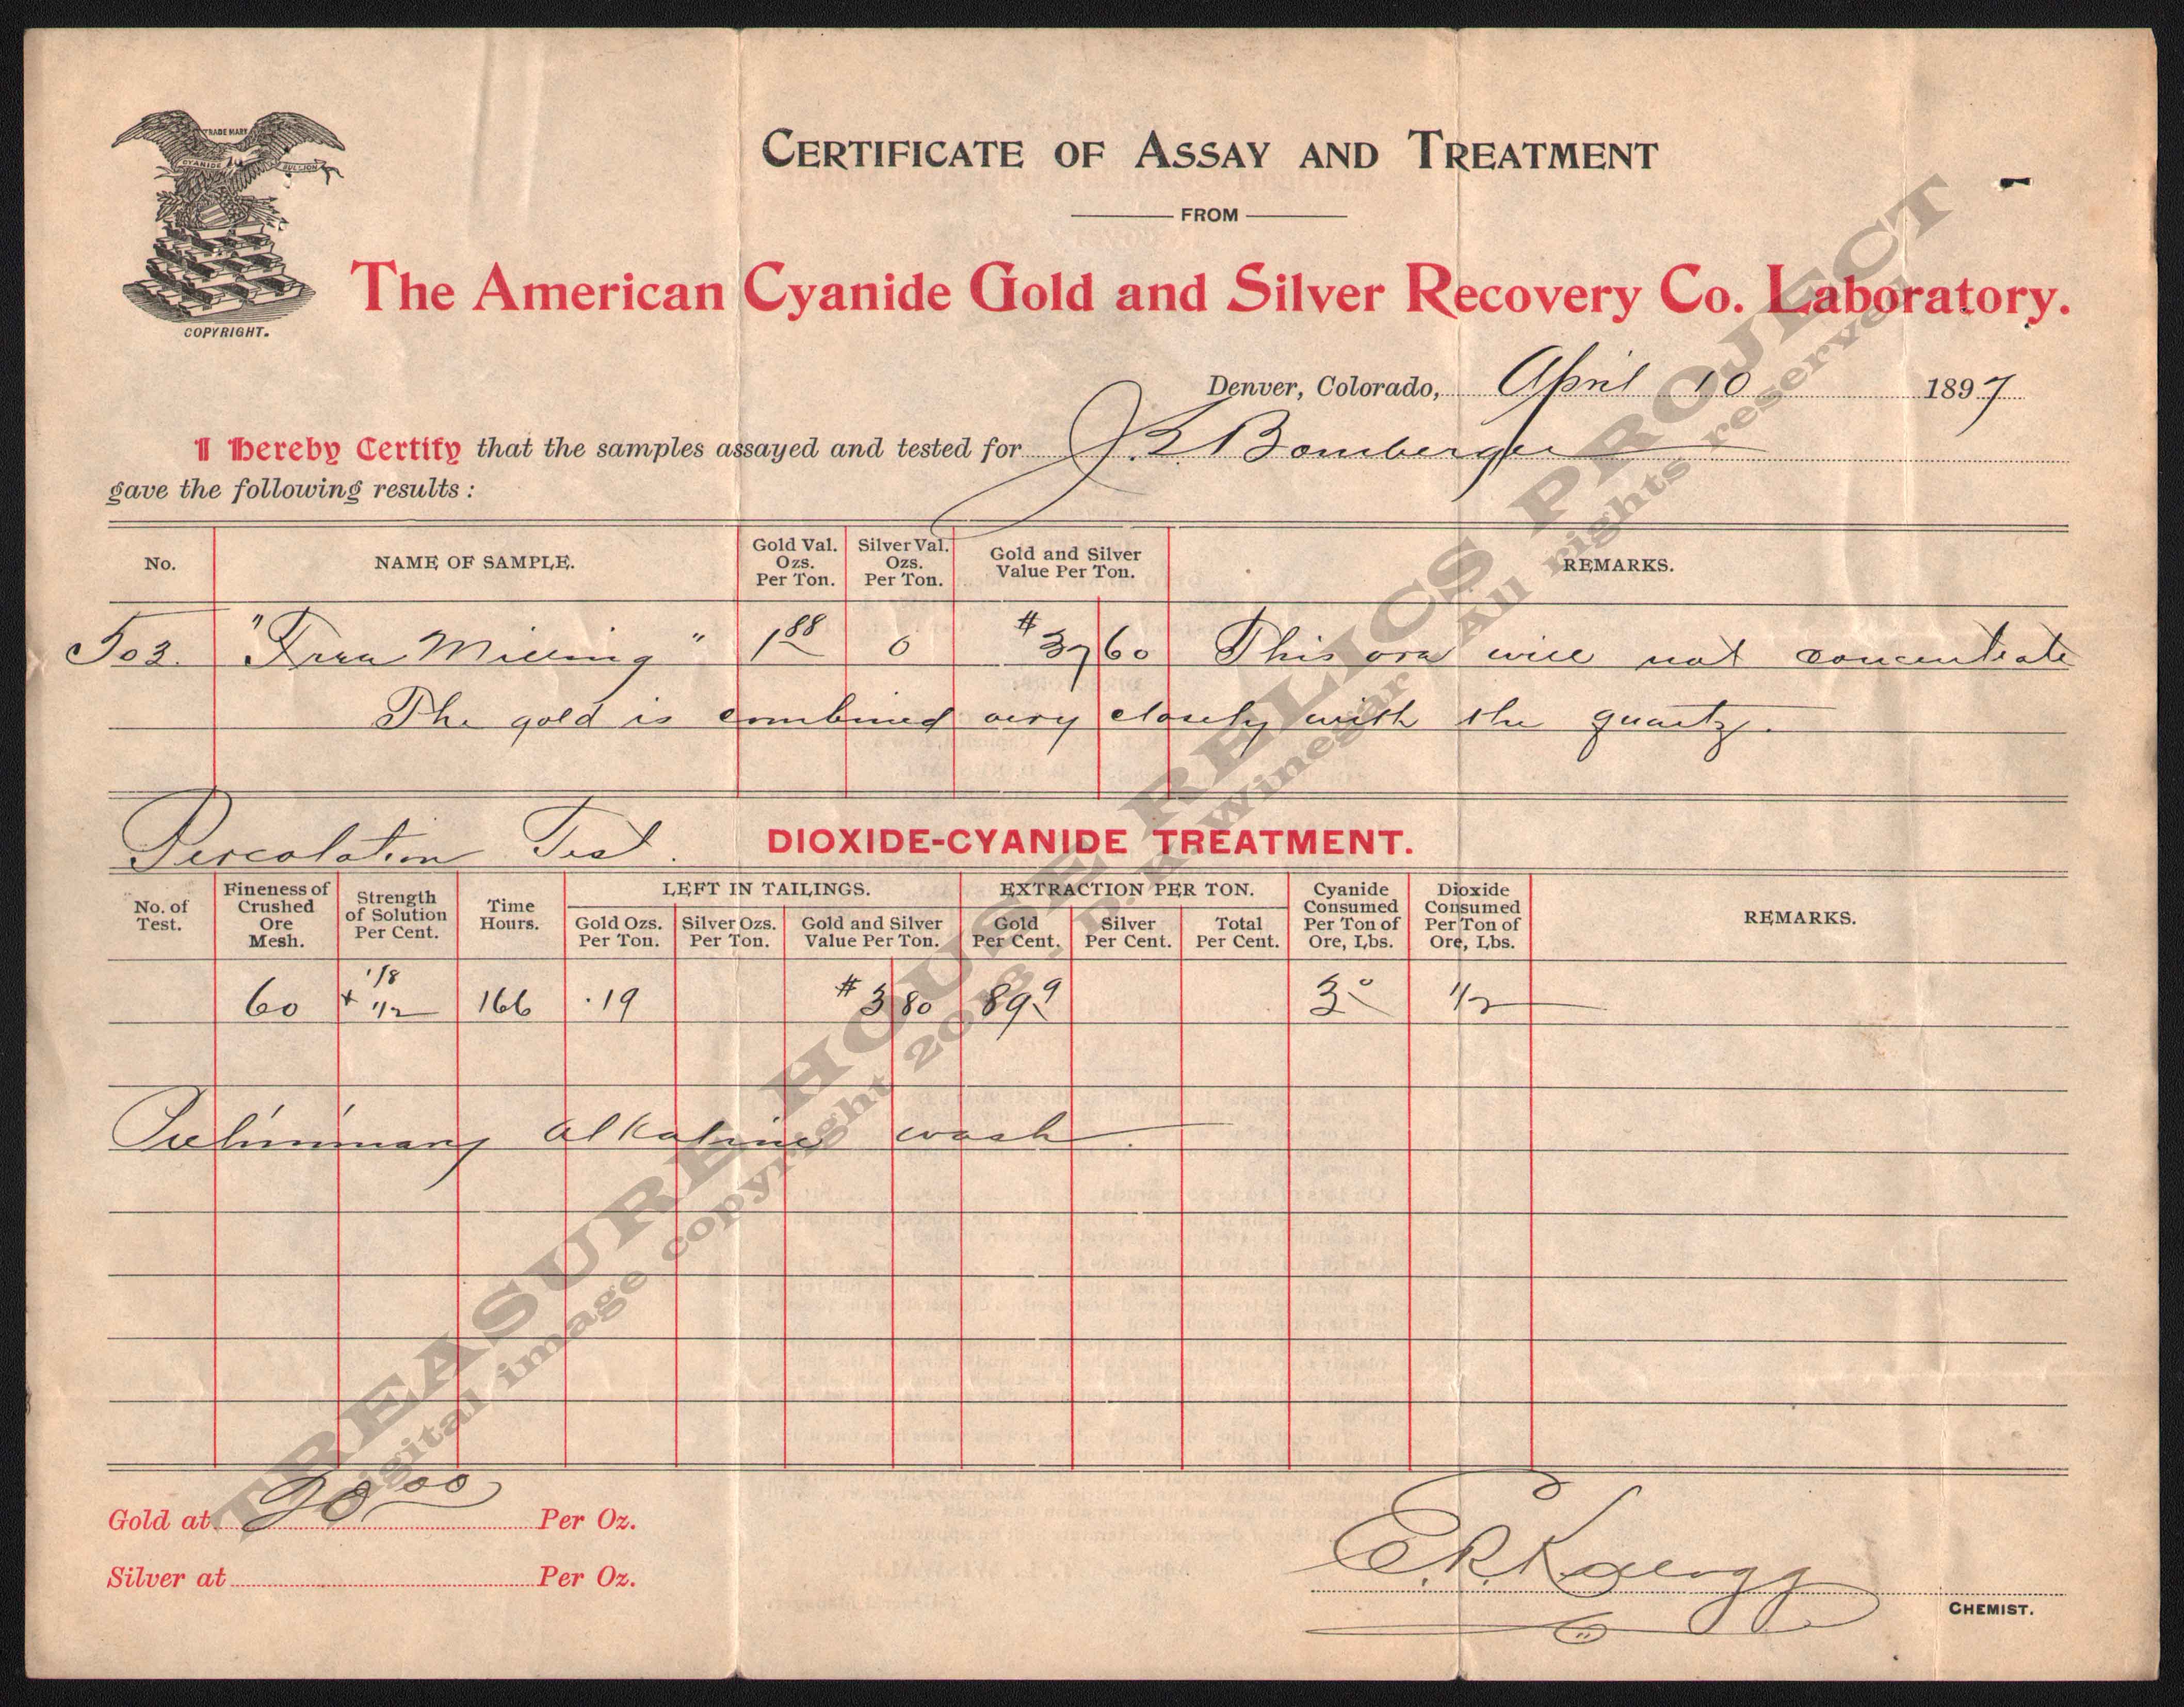 LETTERHEAD/ASSAY_AMERICAN_CYANIDE_GOLD_AND_SILVER_RECOVERY_COMPANY_LABORATORY_DENVER_COLORADO_1897_4_10_FRONT_DSW_323_400_CROP_EMBOSS.jpg